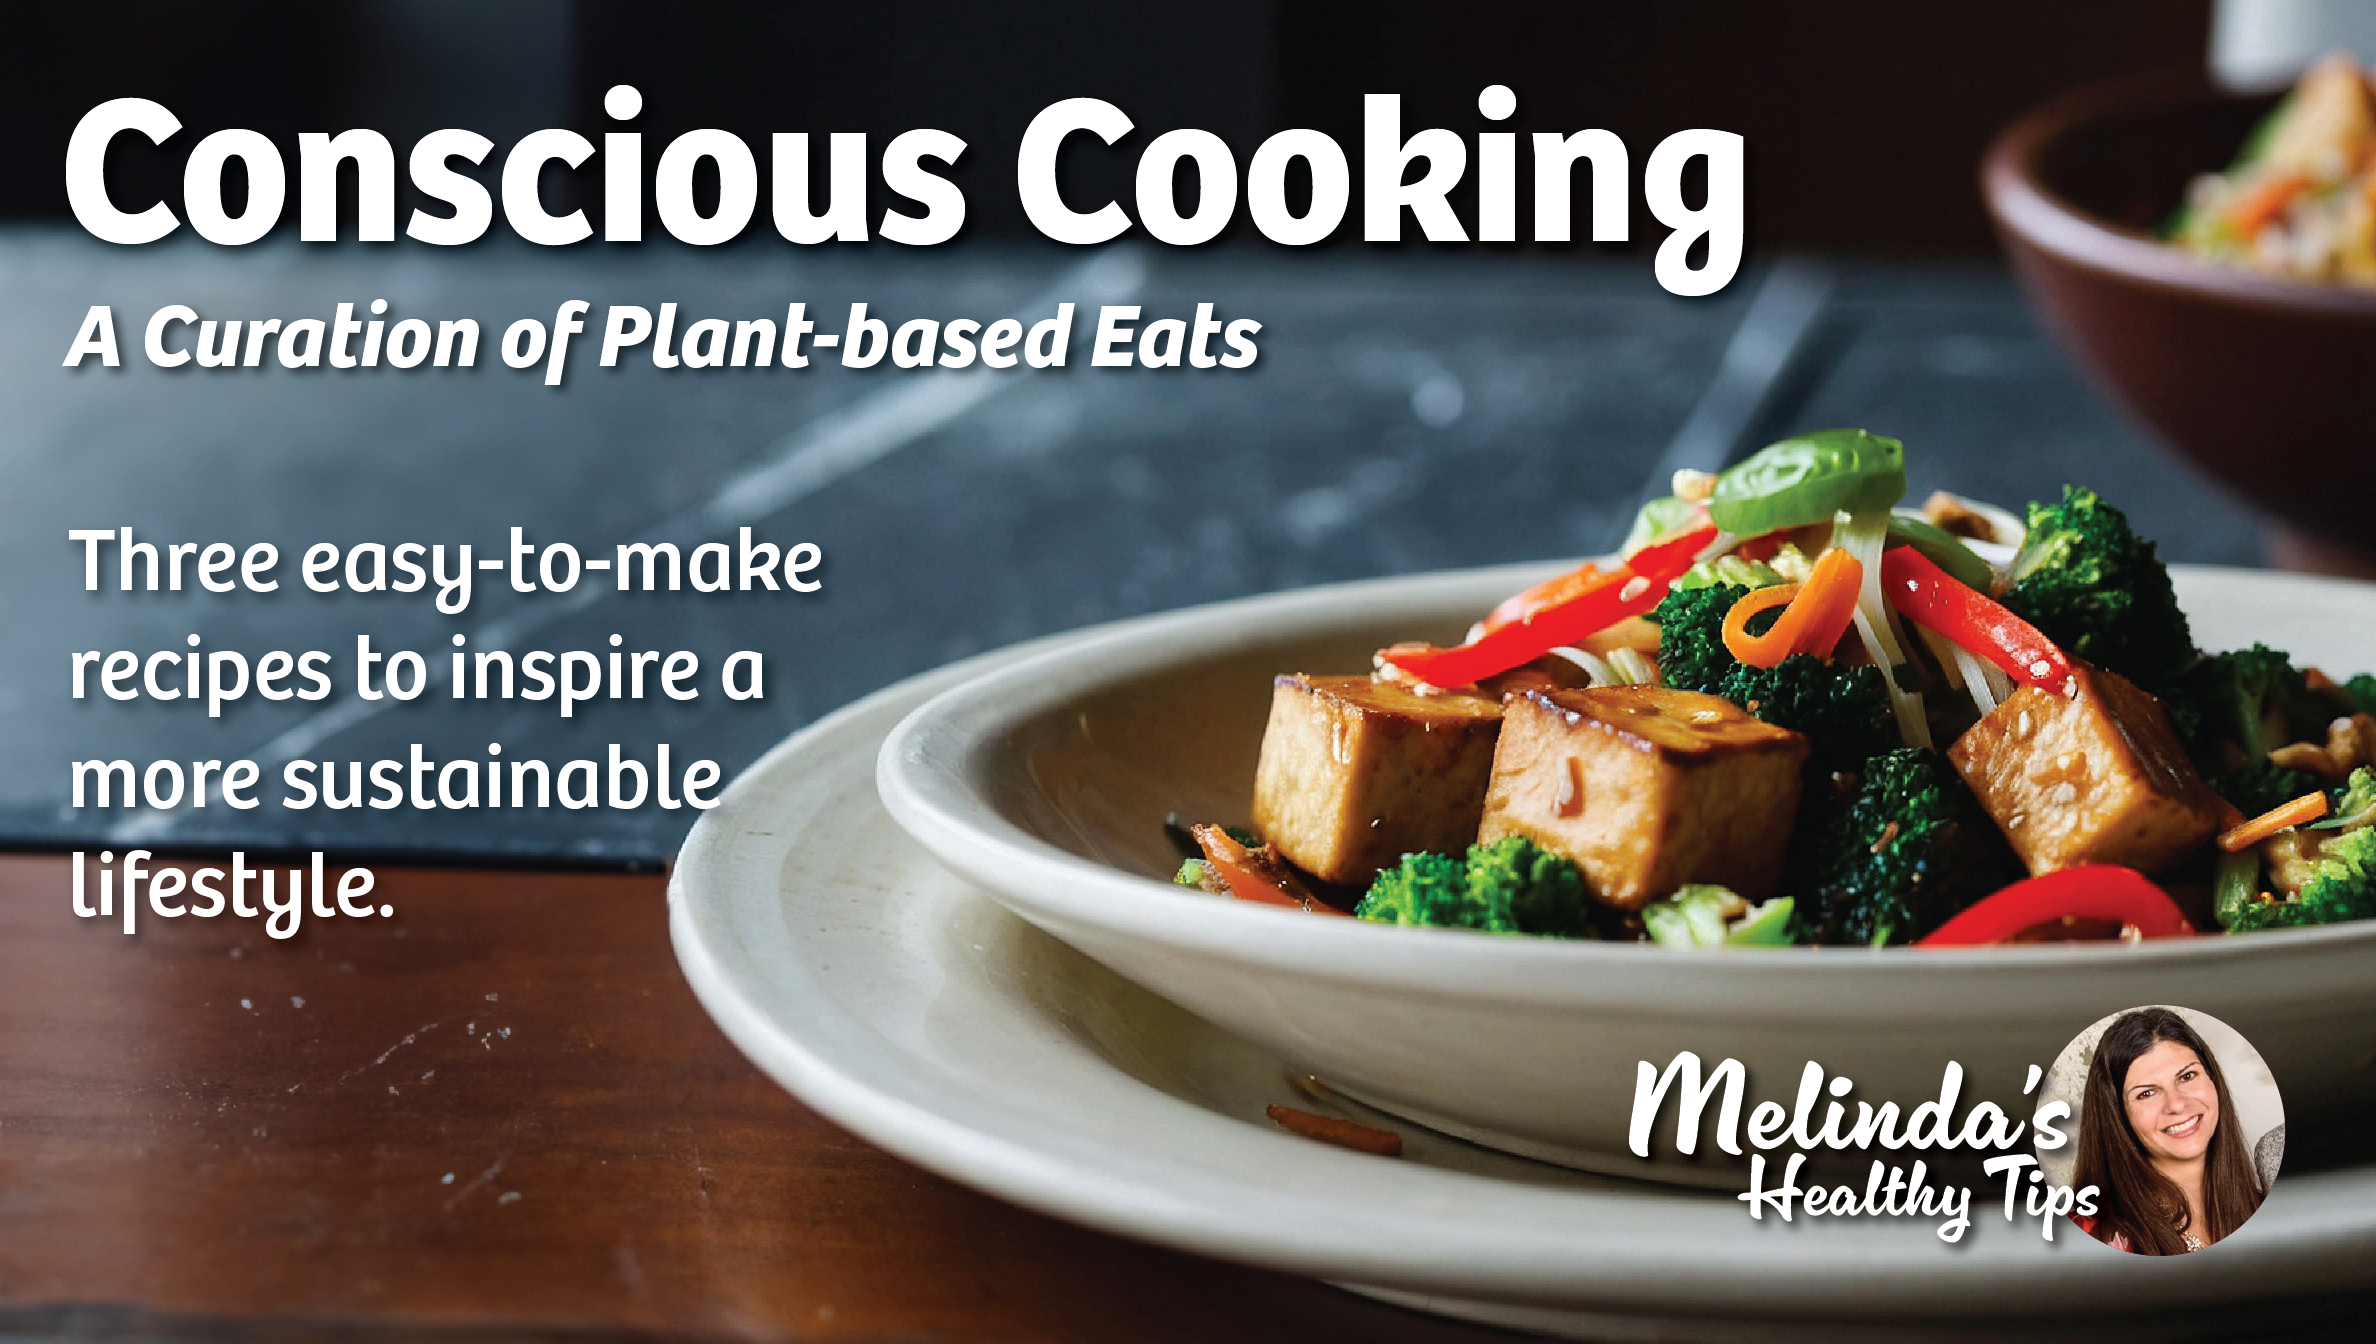 Conscious Cooking: A Curation of Plant-based Eats